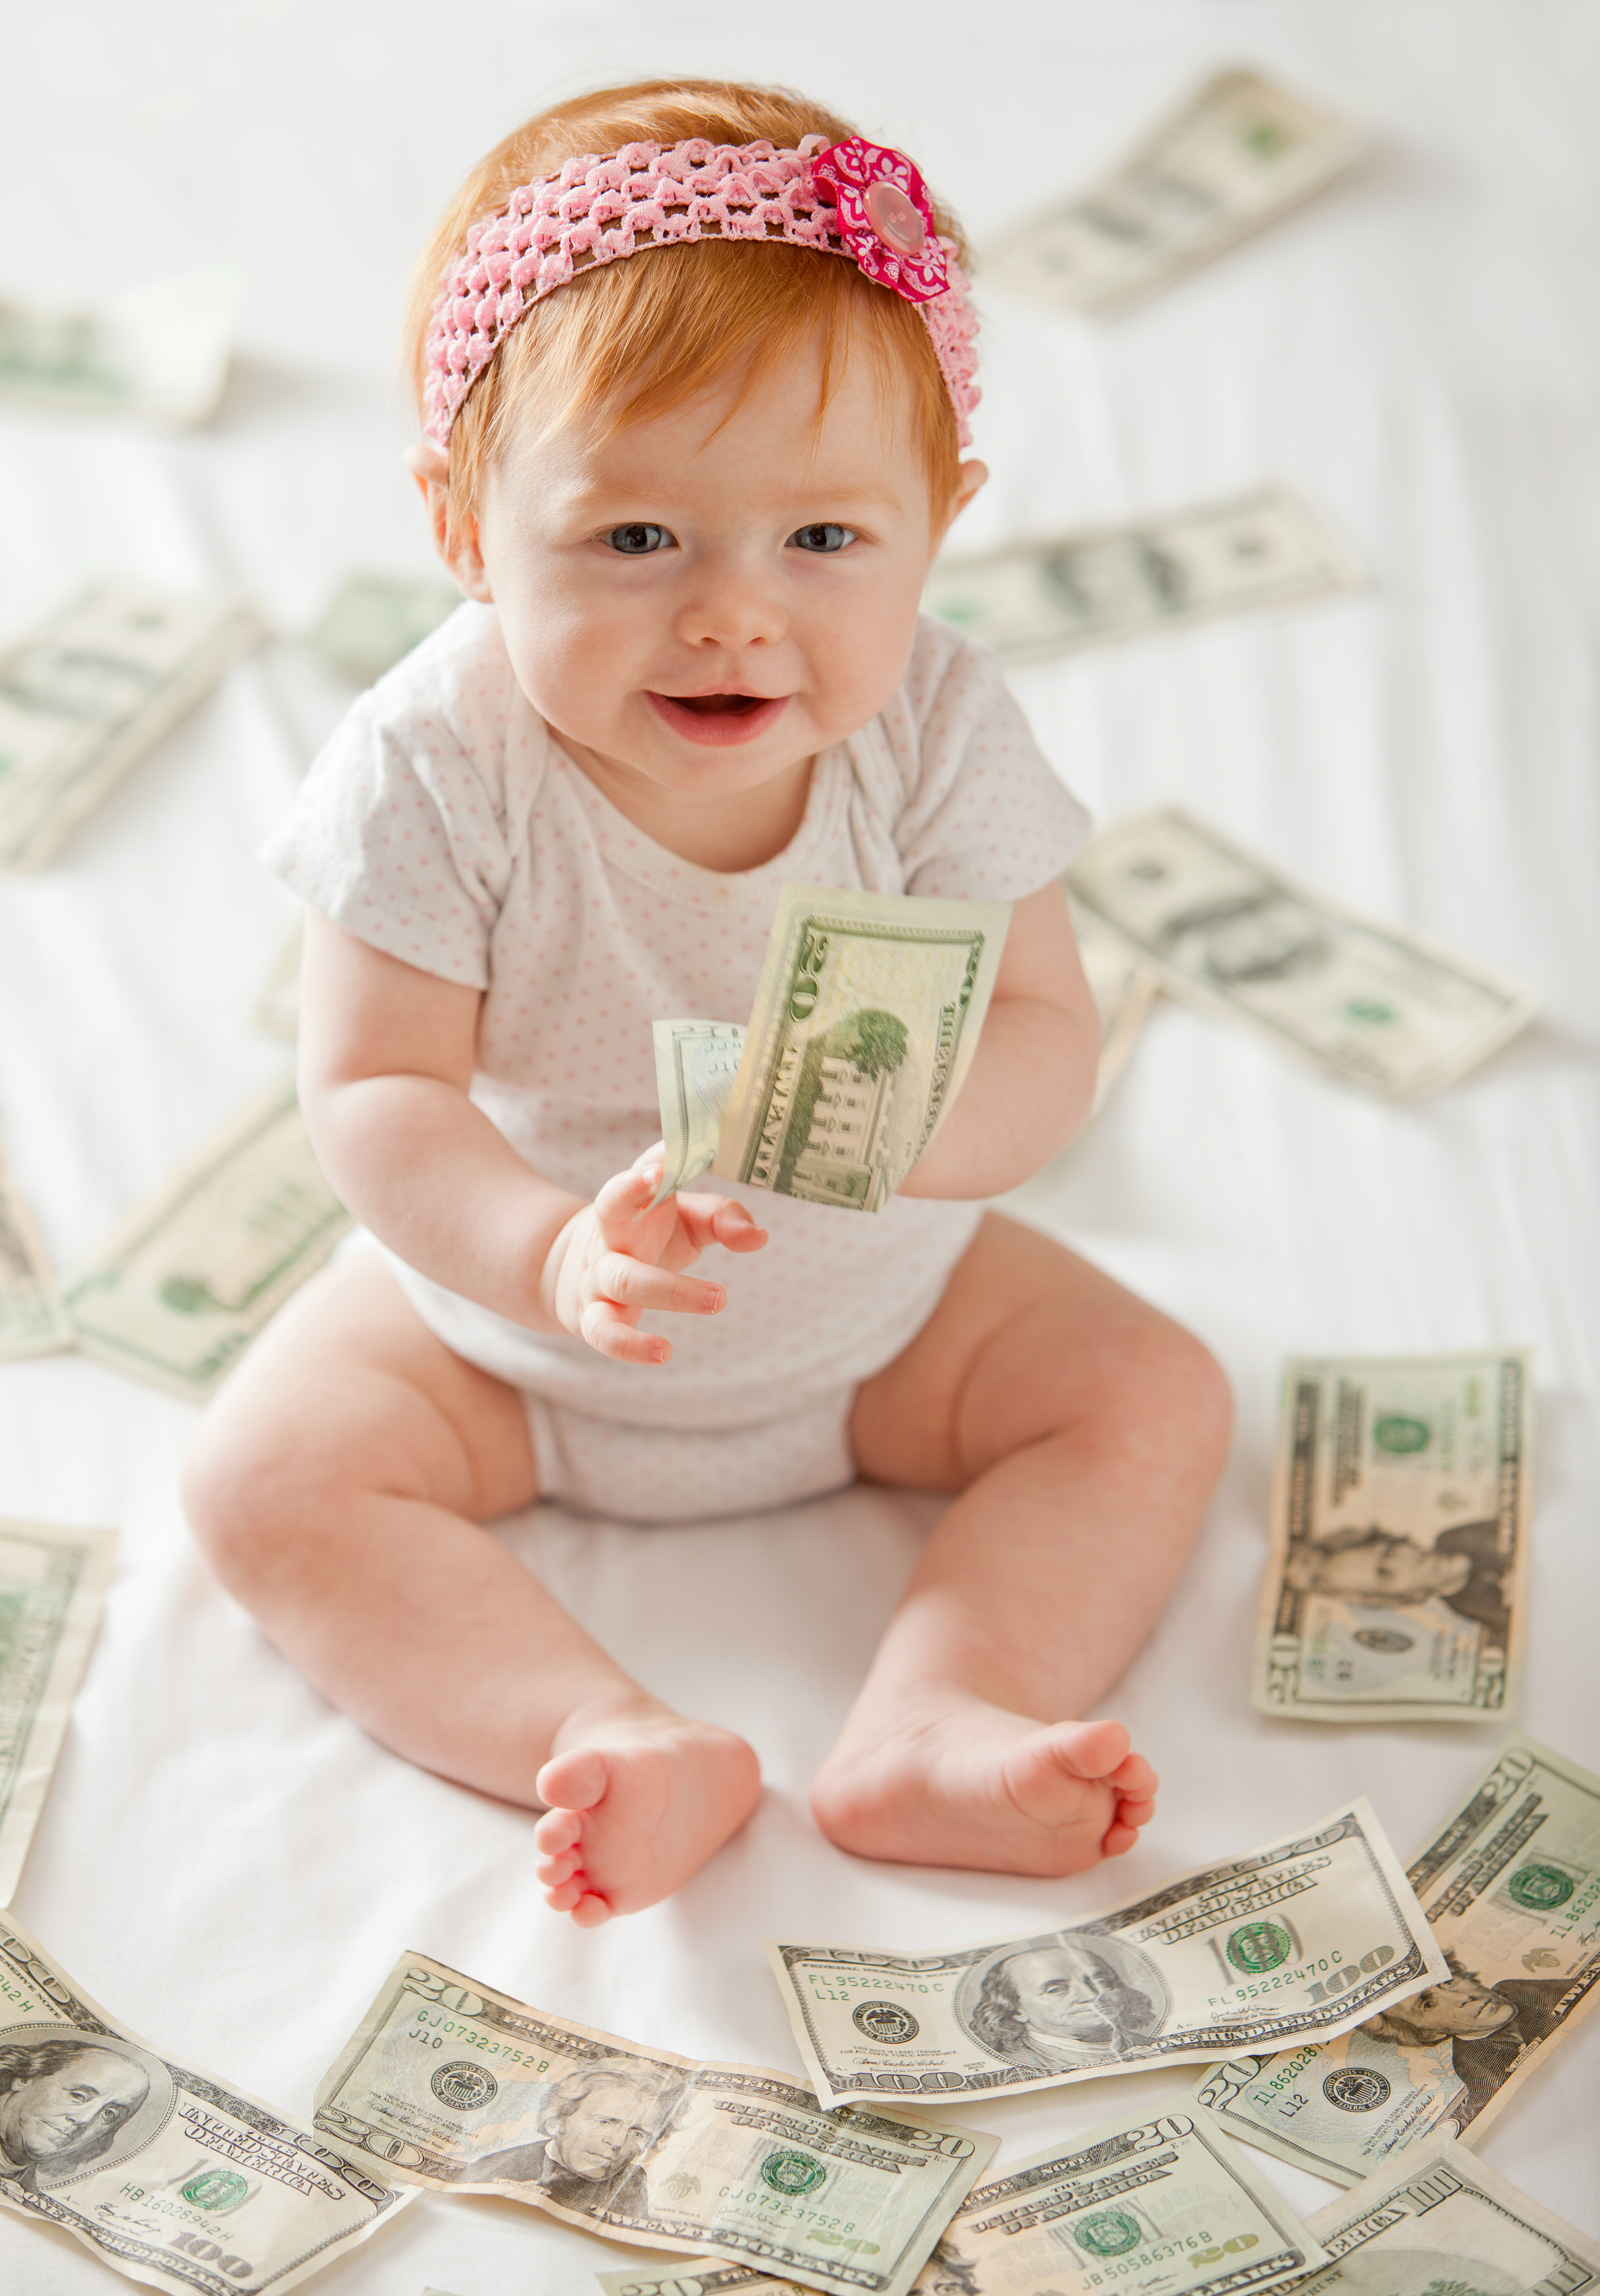 This Company Will Give You $500 If You Have a Baby Today. Wait, What?